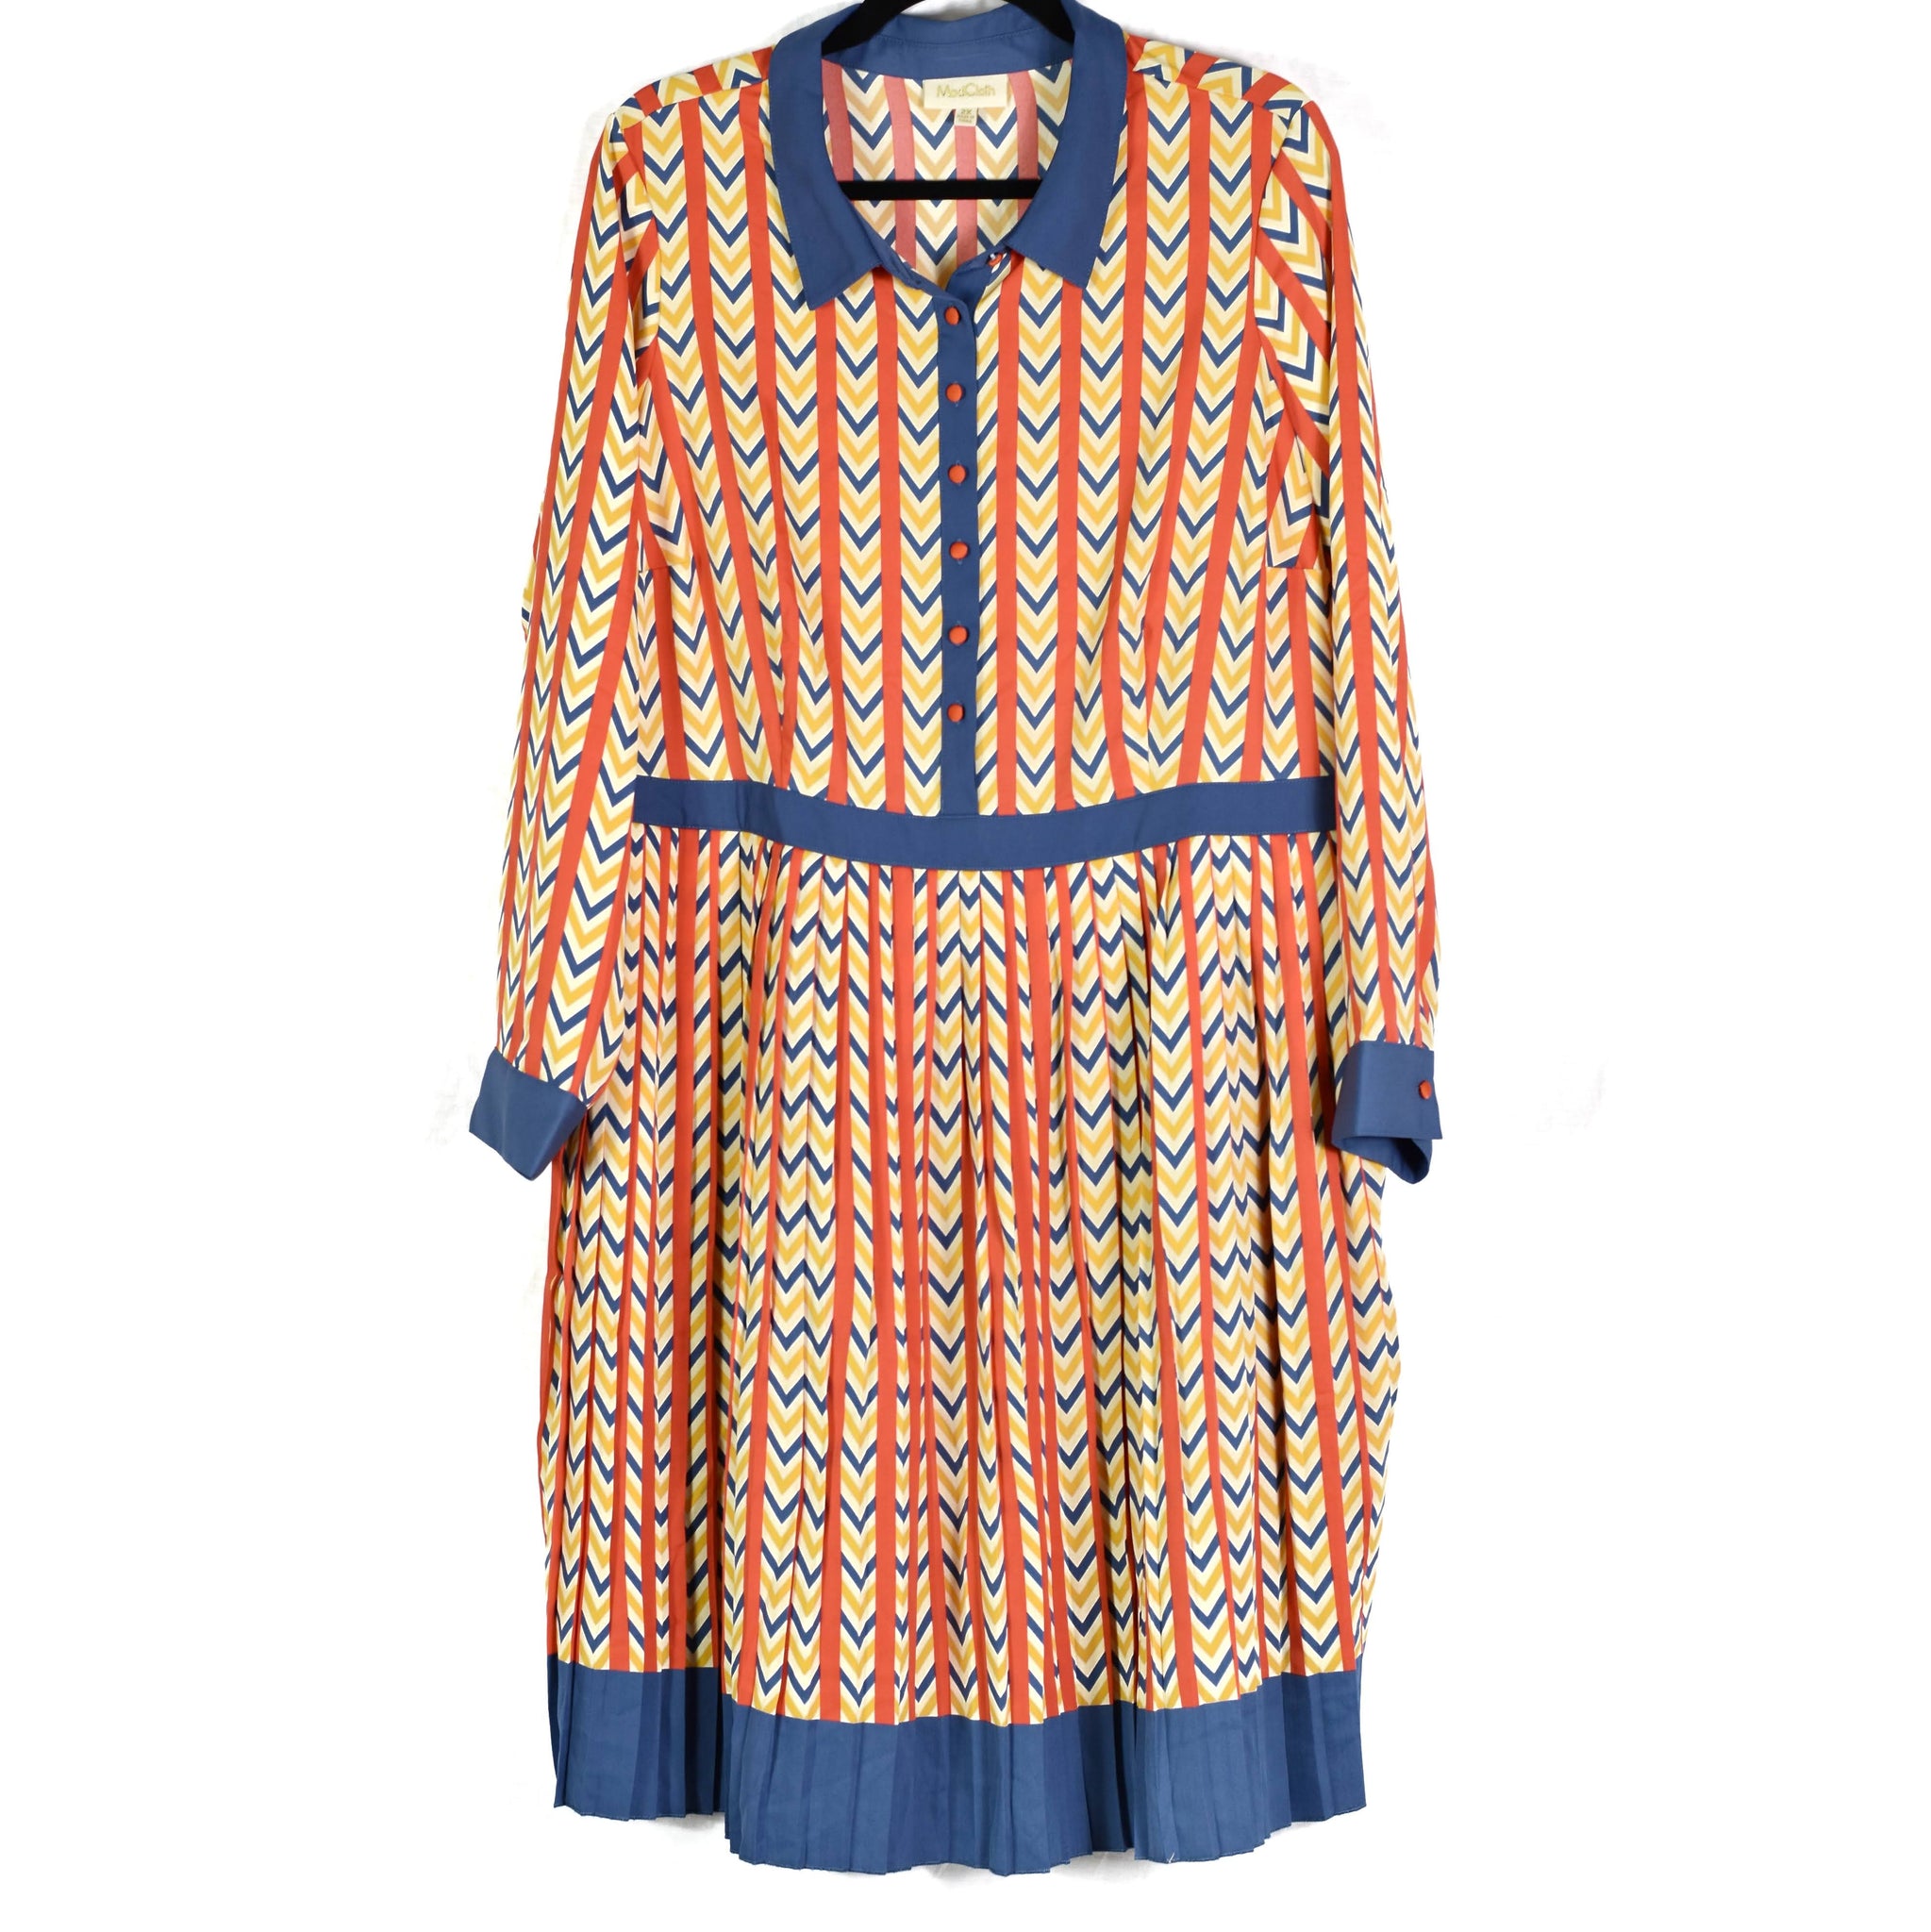 Modcloth Just My Typist Dress in Primary Size 4X